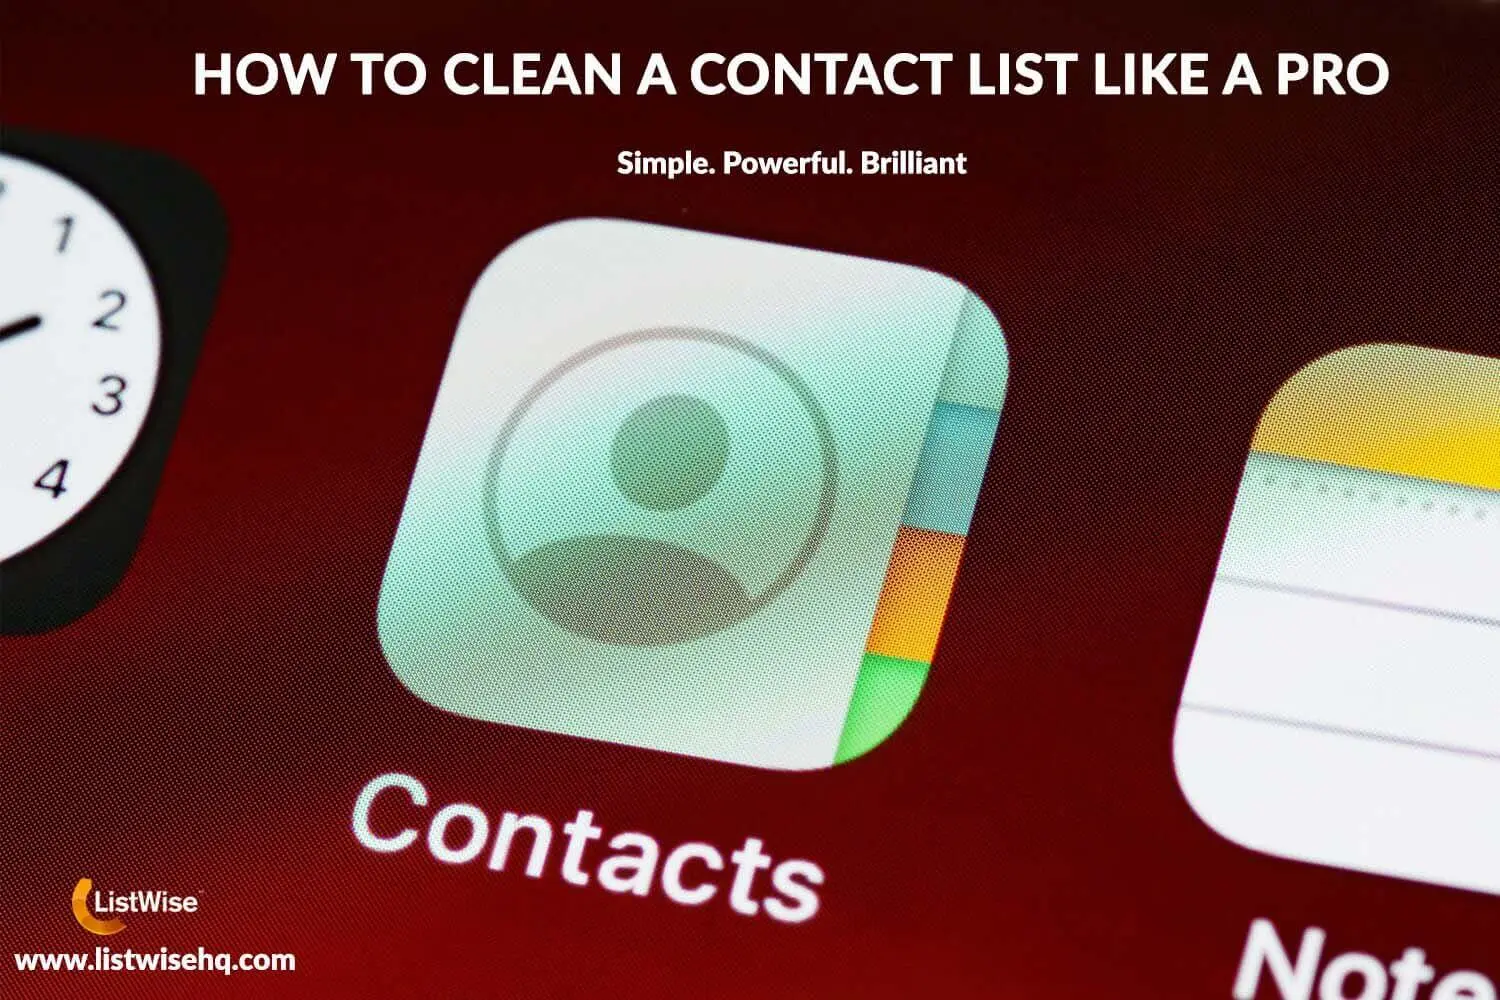 How to Clean a Contact List like a Pro